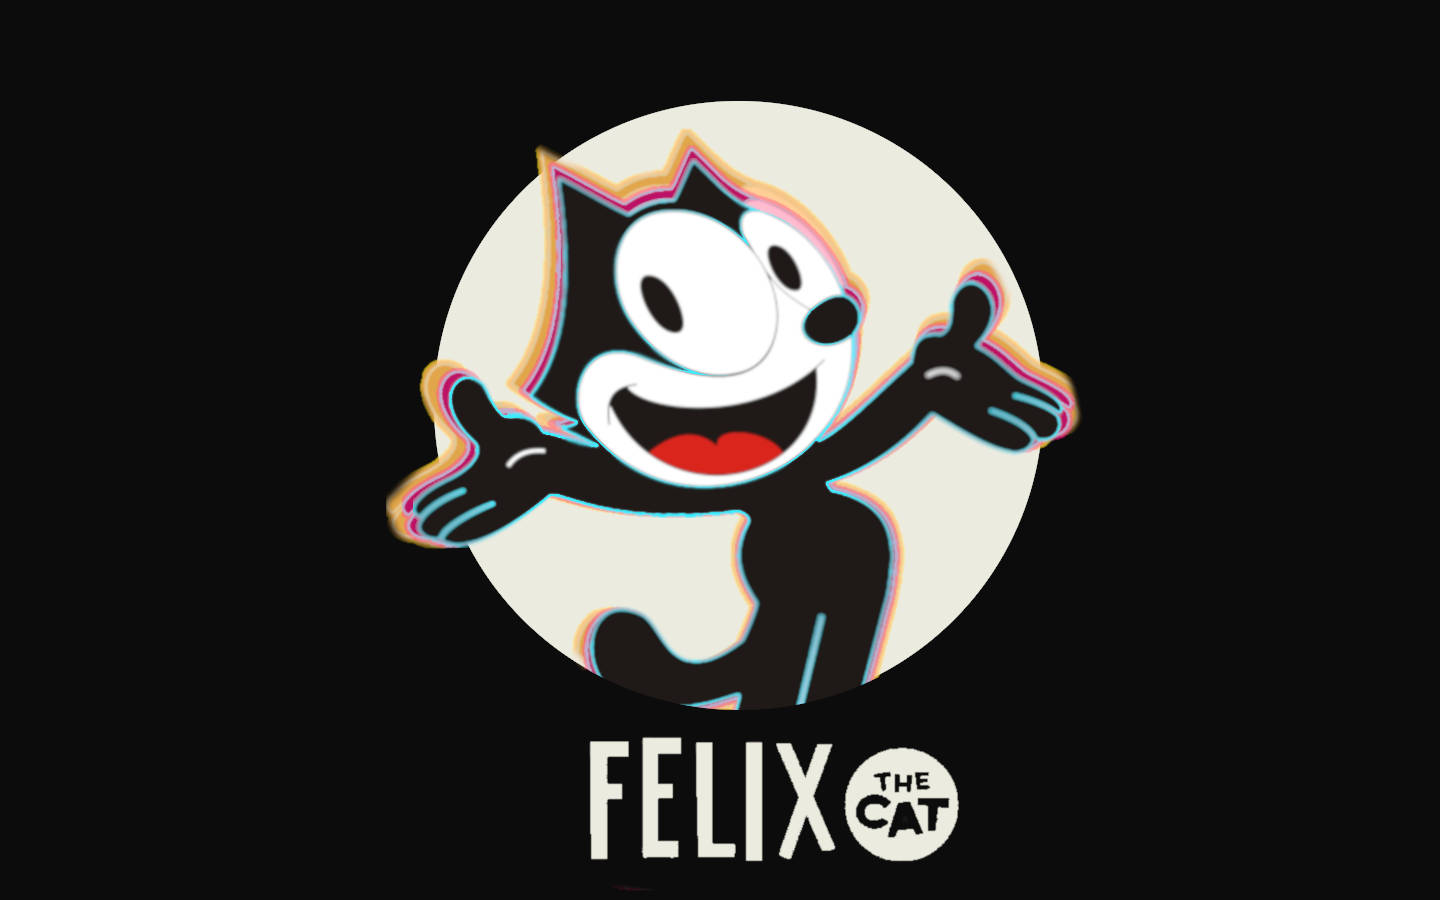 Felix The Cat - The Classic Animated Character Wallpaper